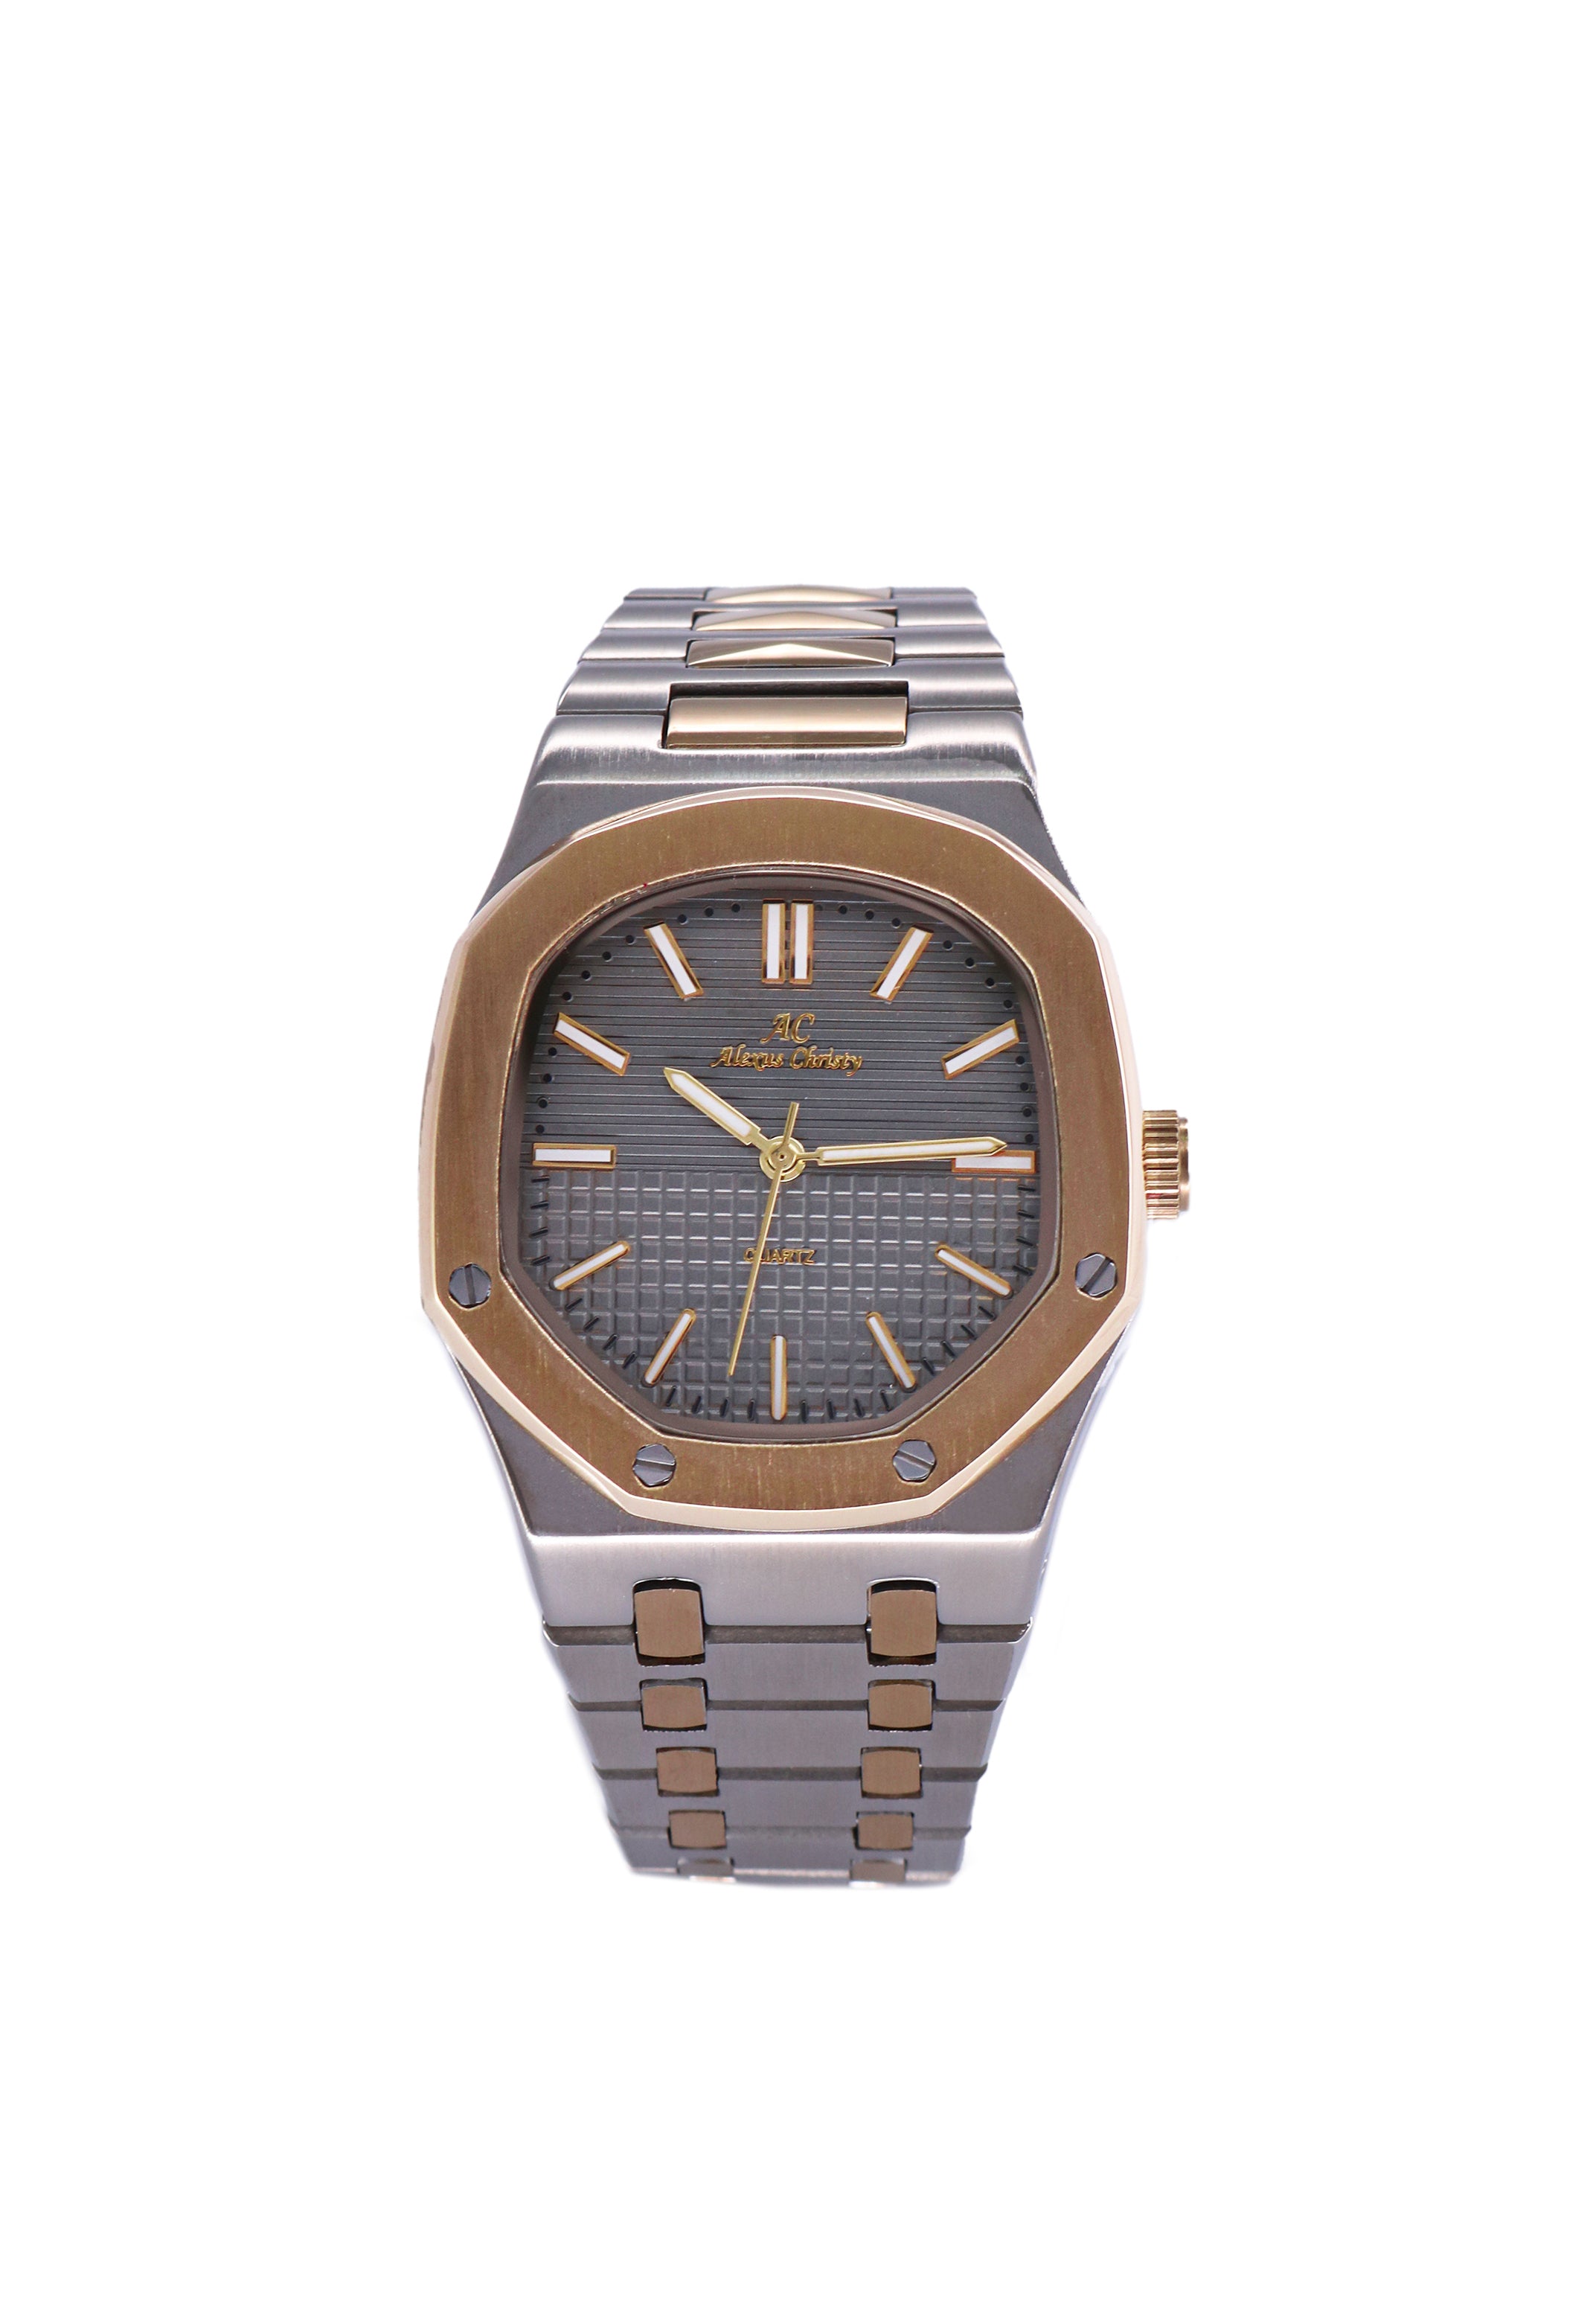 Duo Stainless Steel Analog Classy Men Watch